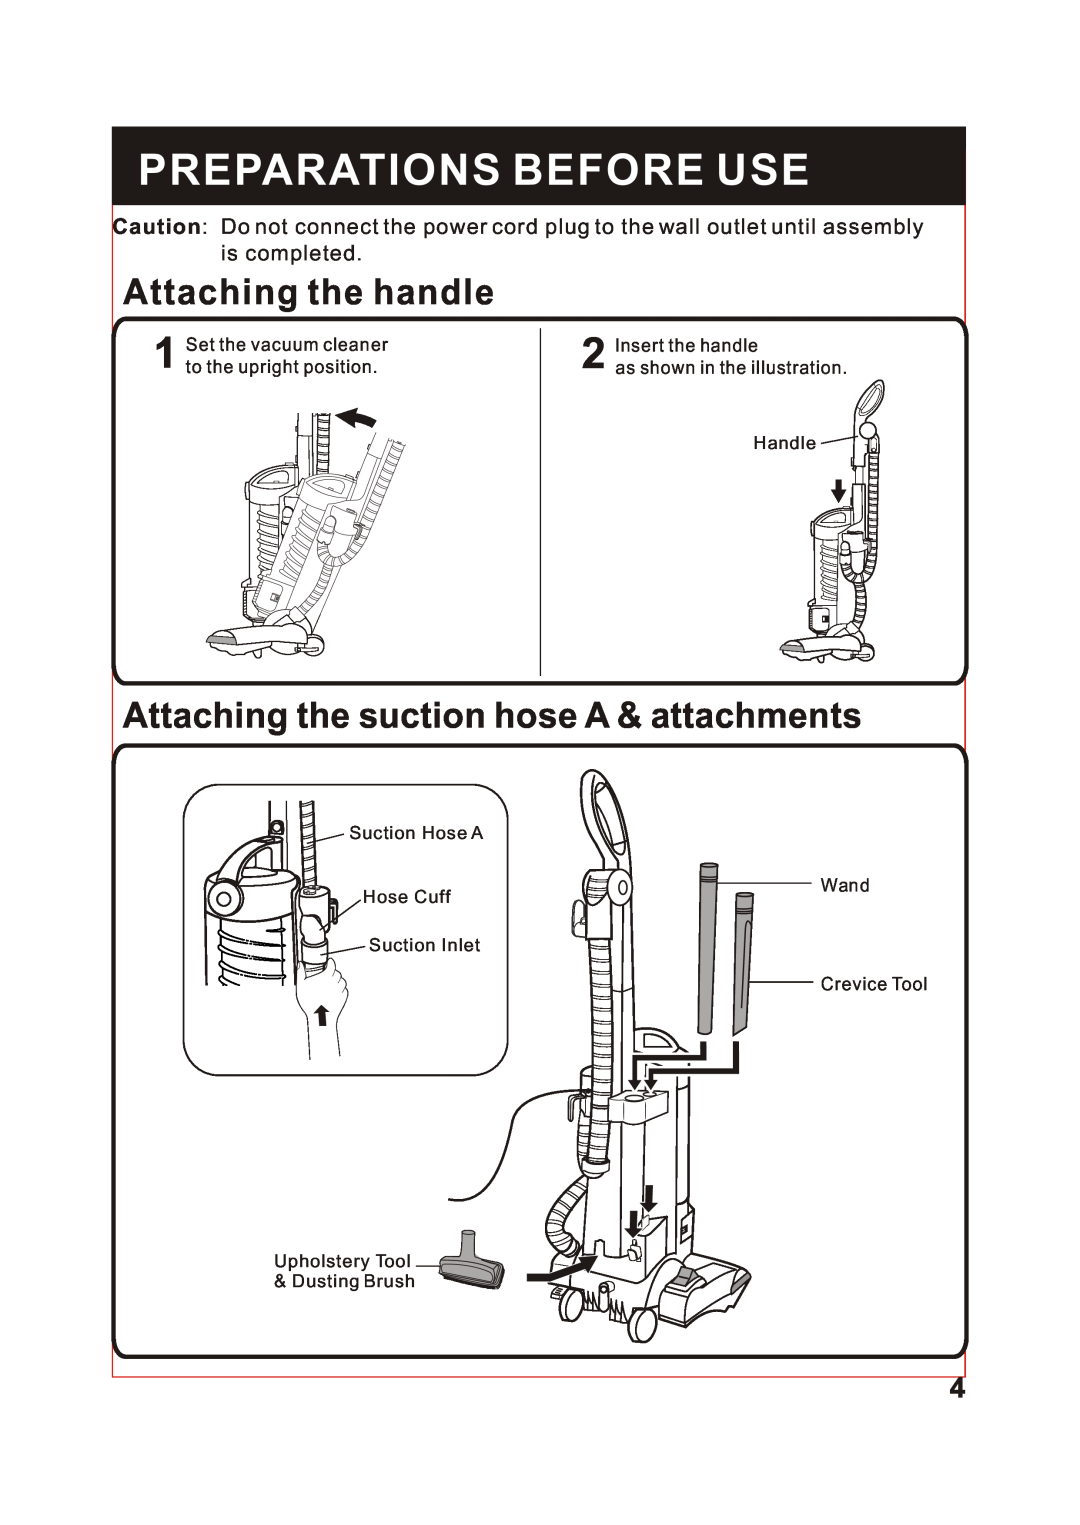 Fantom Vacuum FM741 Preparations Before Use, Attaching the handle, Attaching the suction hose A & attachments 